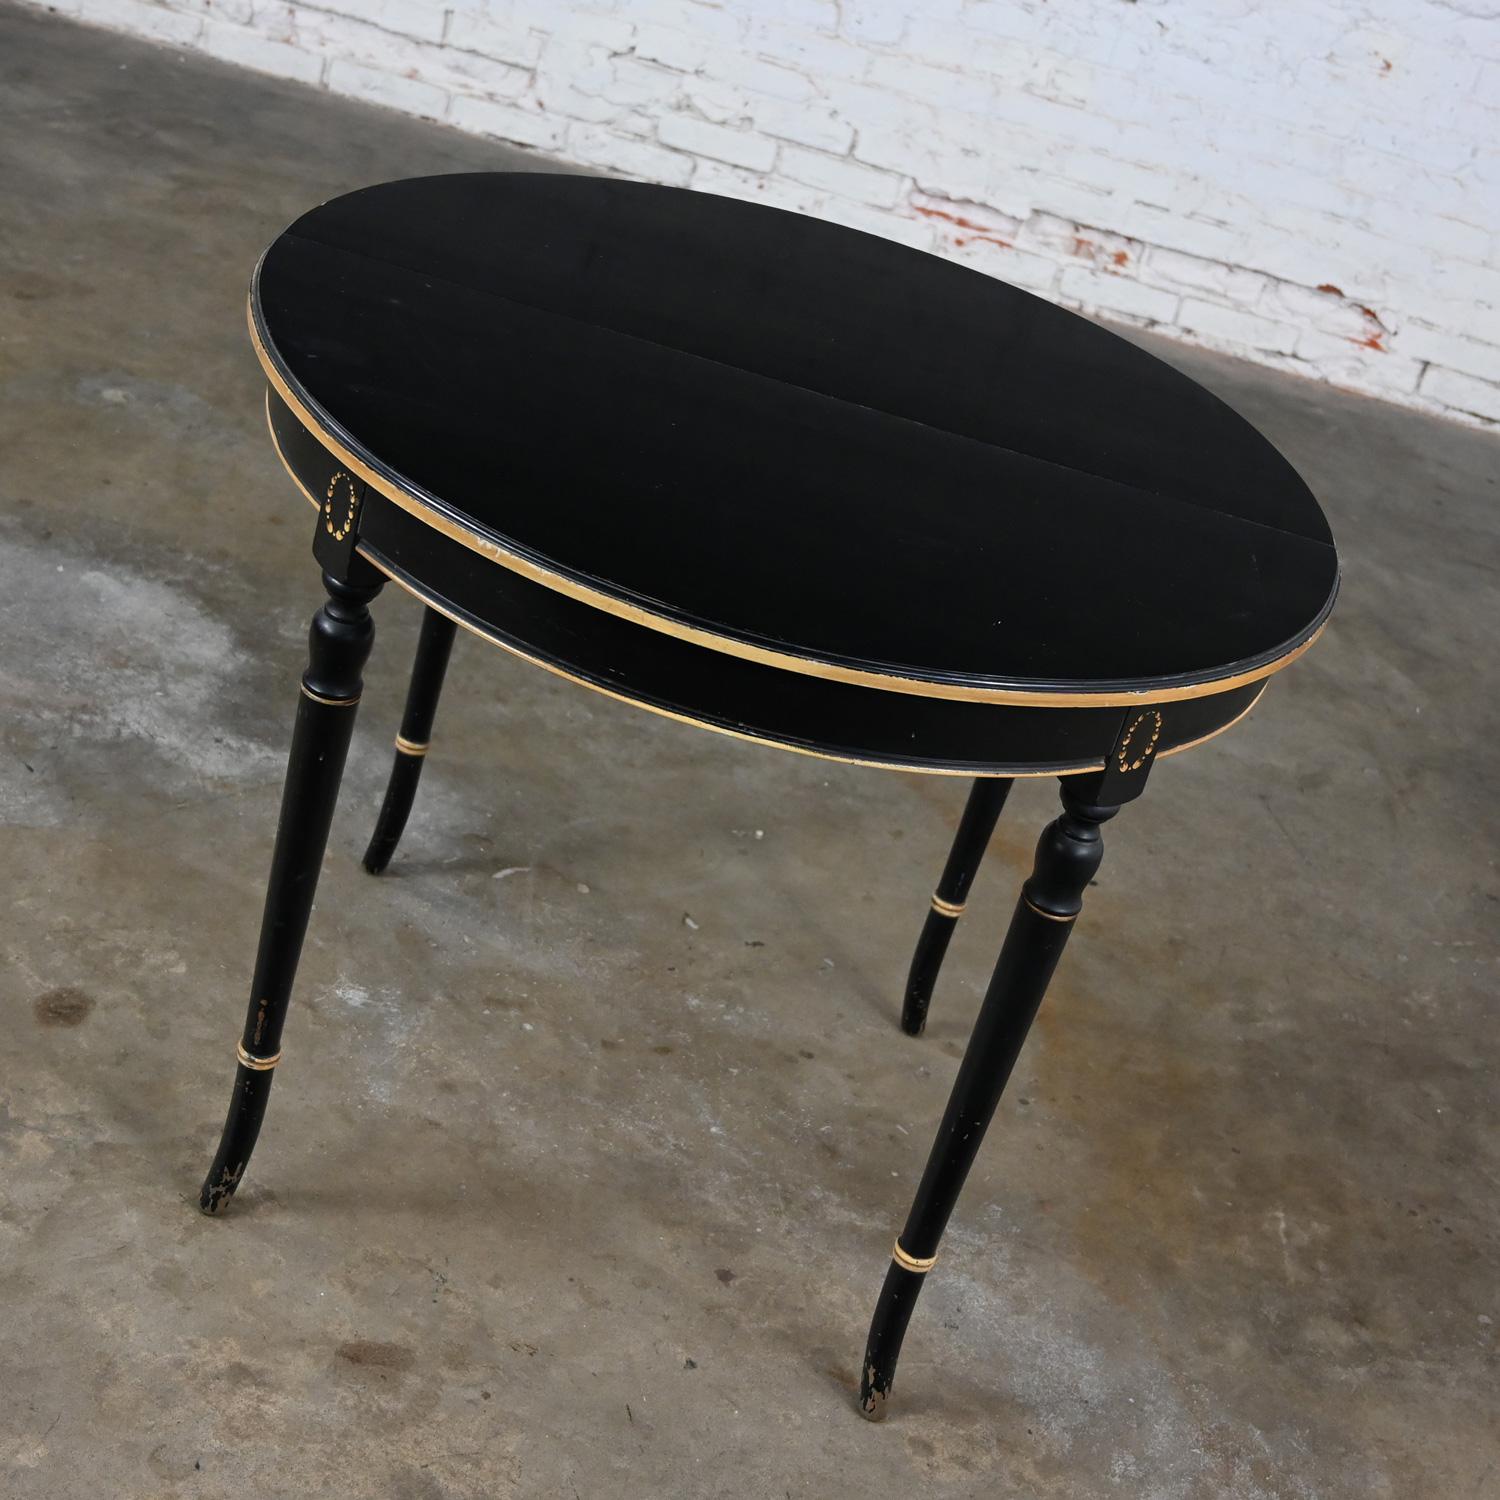 Handsome vintage Neoclassical round dining table or center table black painted with an all-over age distressed finish and gold details. Beautiful, distressed condition, keeping in mind that this is vintage and not new so will have signs of use and